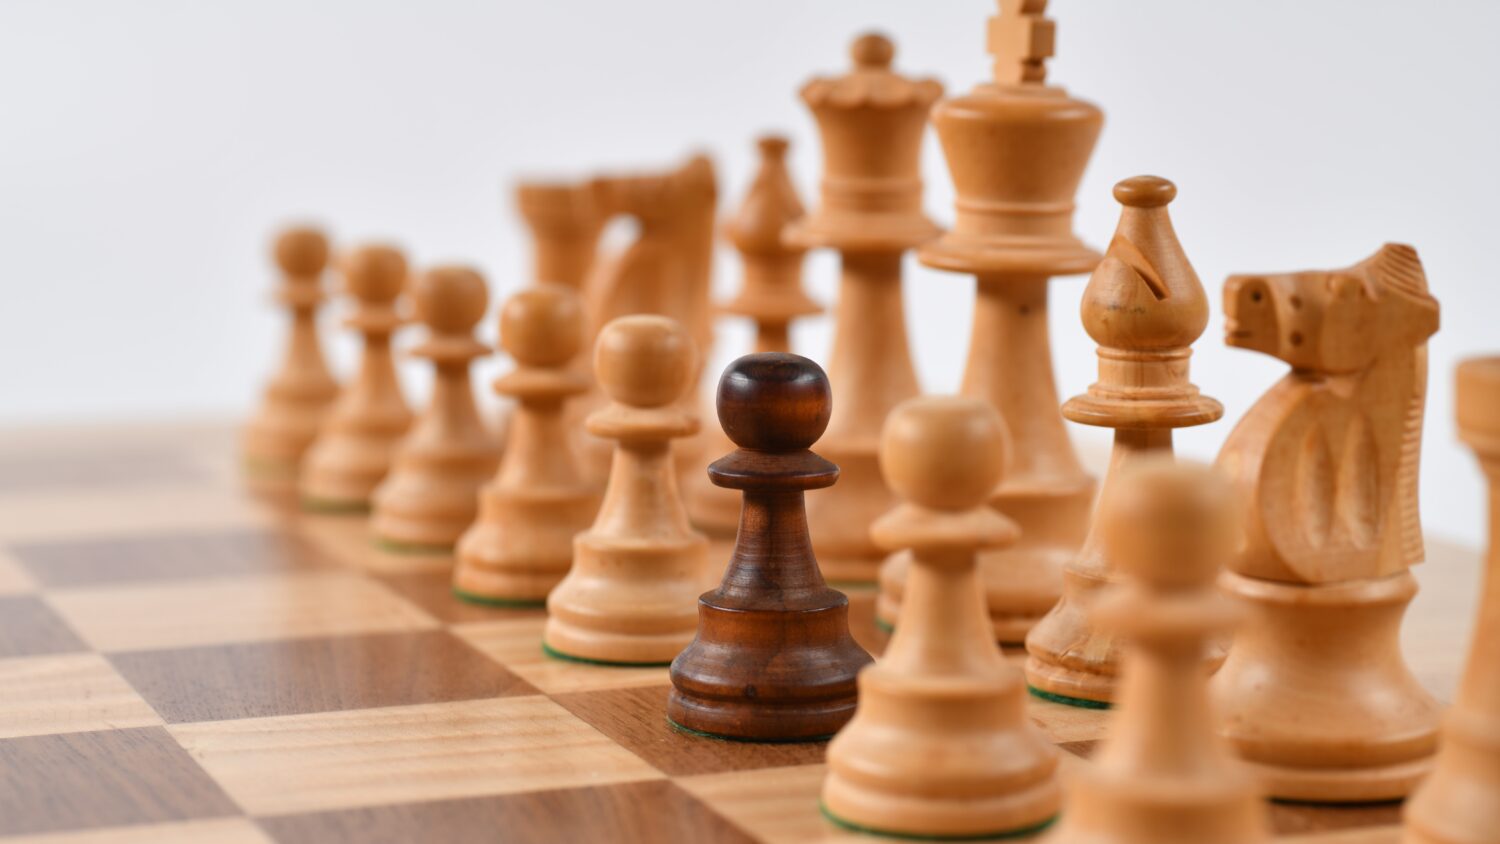 Chennai all set for the chess olympiad